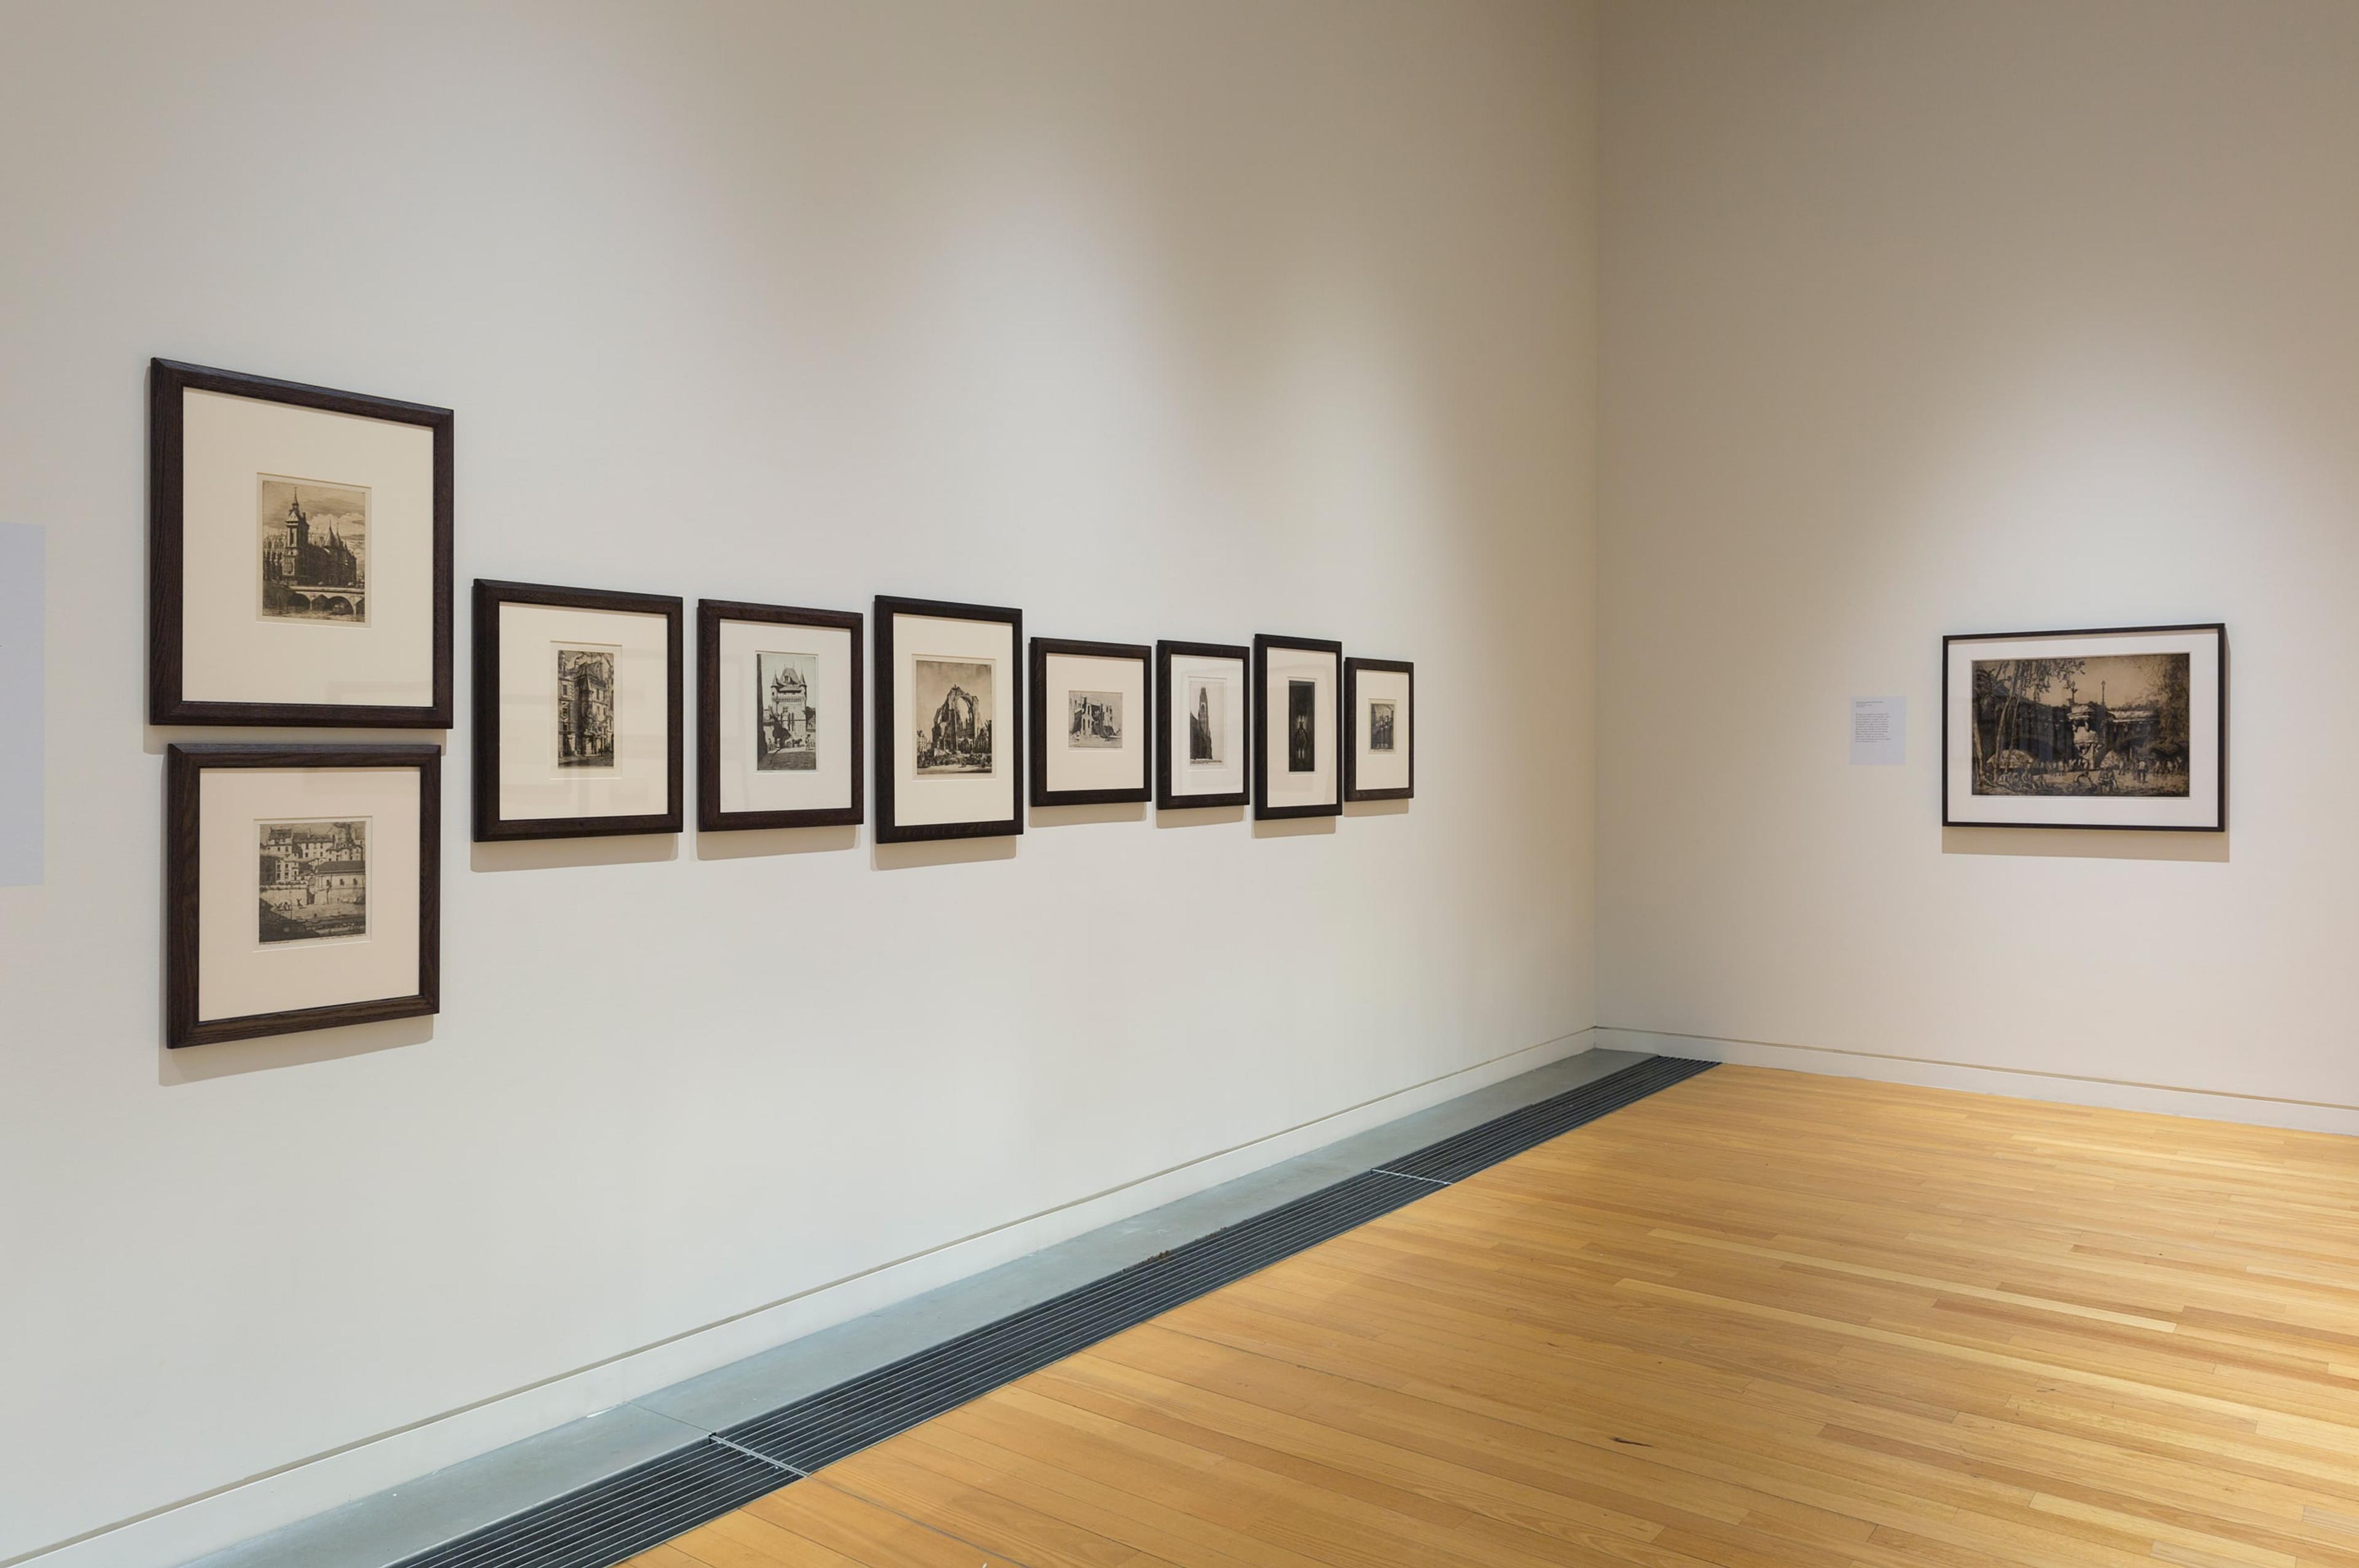 Installation view, Traces of the Wake: The Etching Revival in Britain and Beyond, curated by David Maskill and his ARTH 403 students, Adam Art Gallery Te Pātaka Toi, Victoria University of Wellington, 2015. Photo: Shaun Waugh